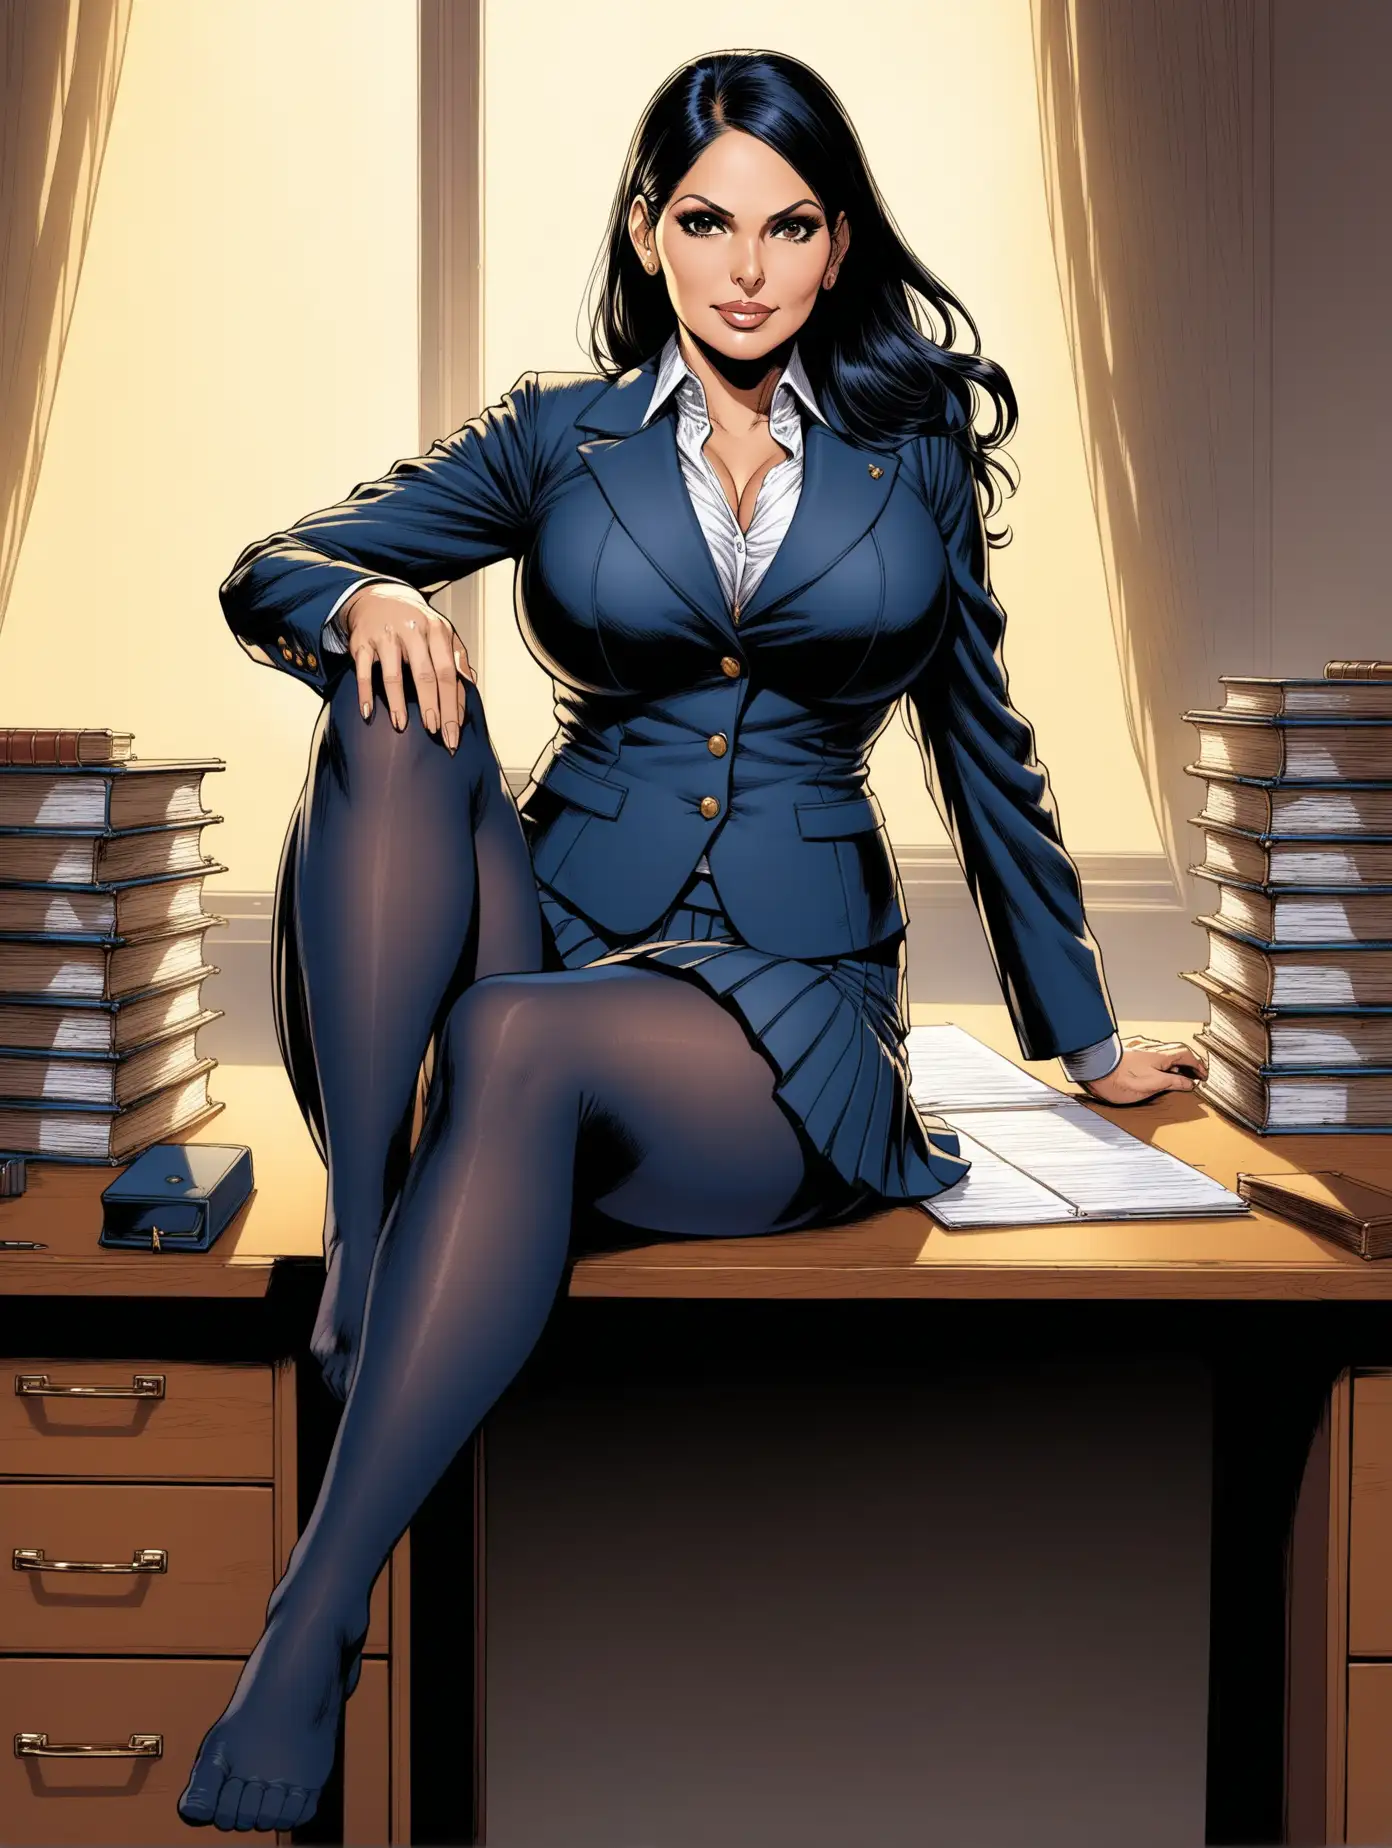 Professional Woman in Navy Skirt Suit Relaxing at Desk